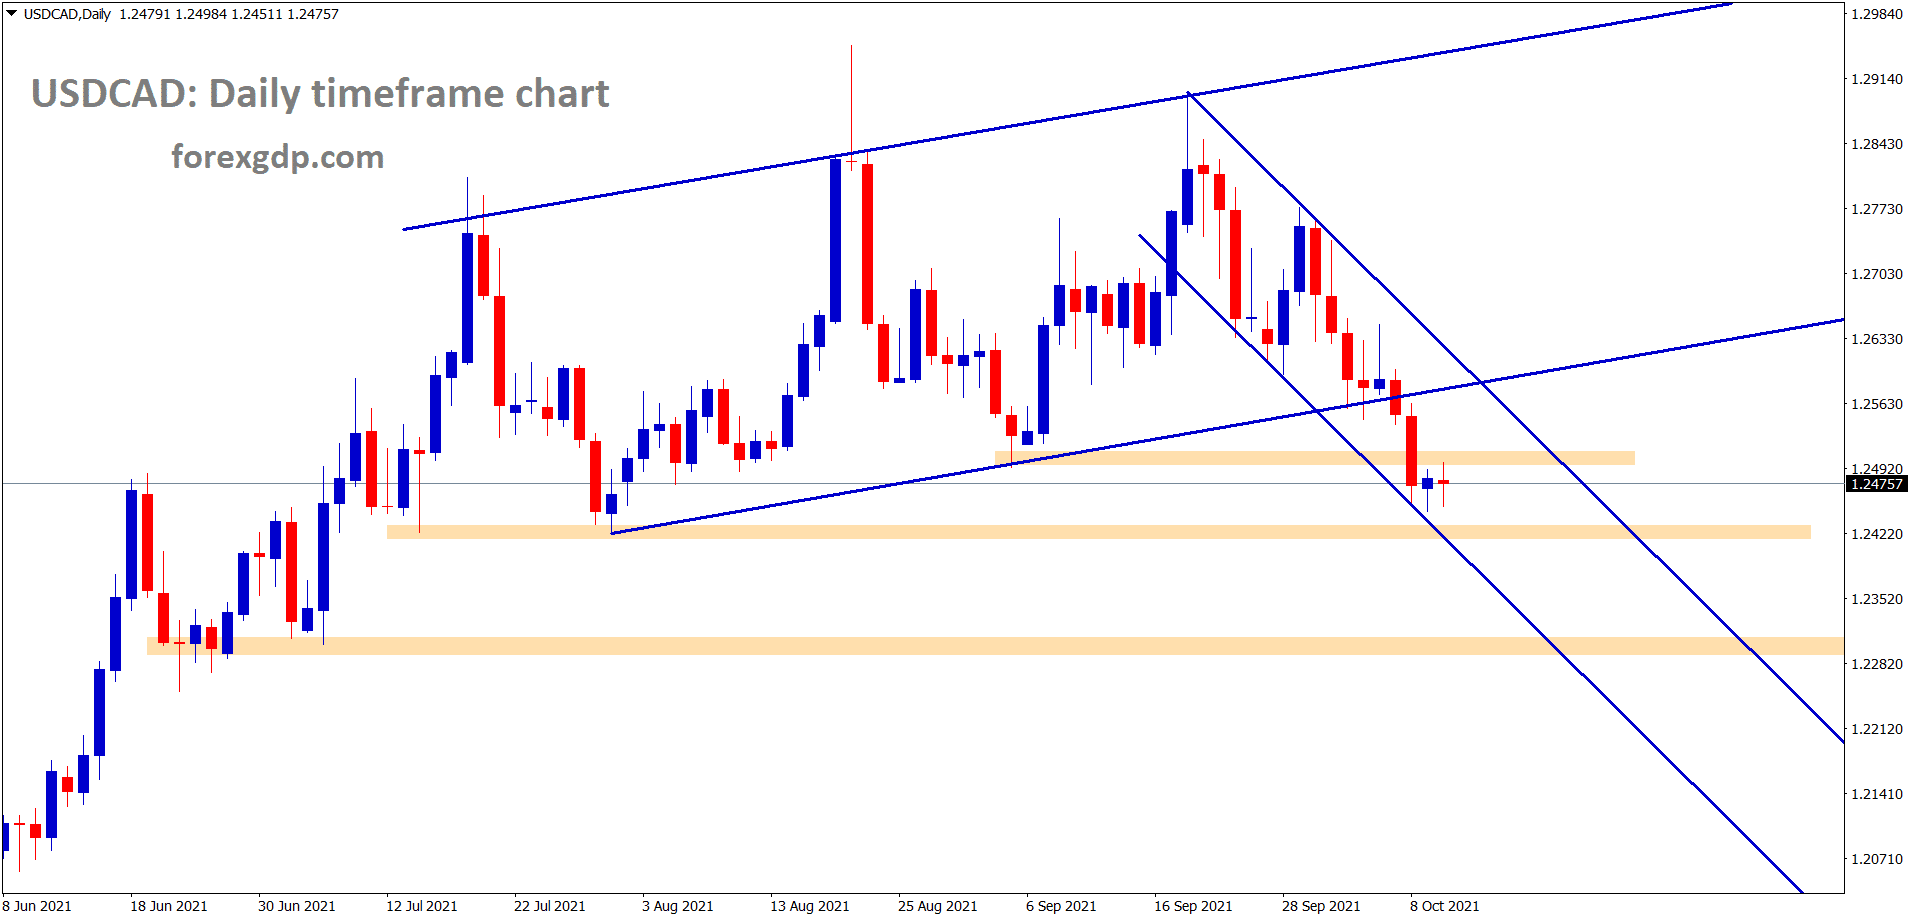 USDCAD is consolidating at the lower low level of descending channel